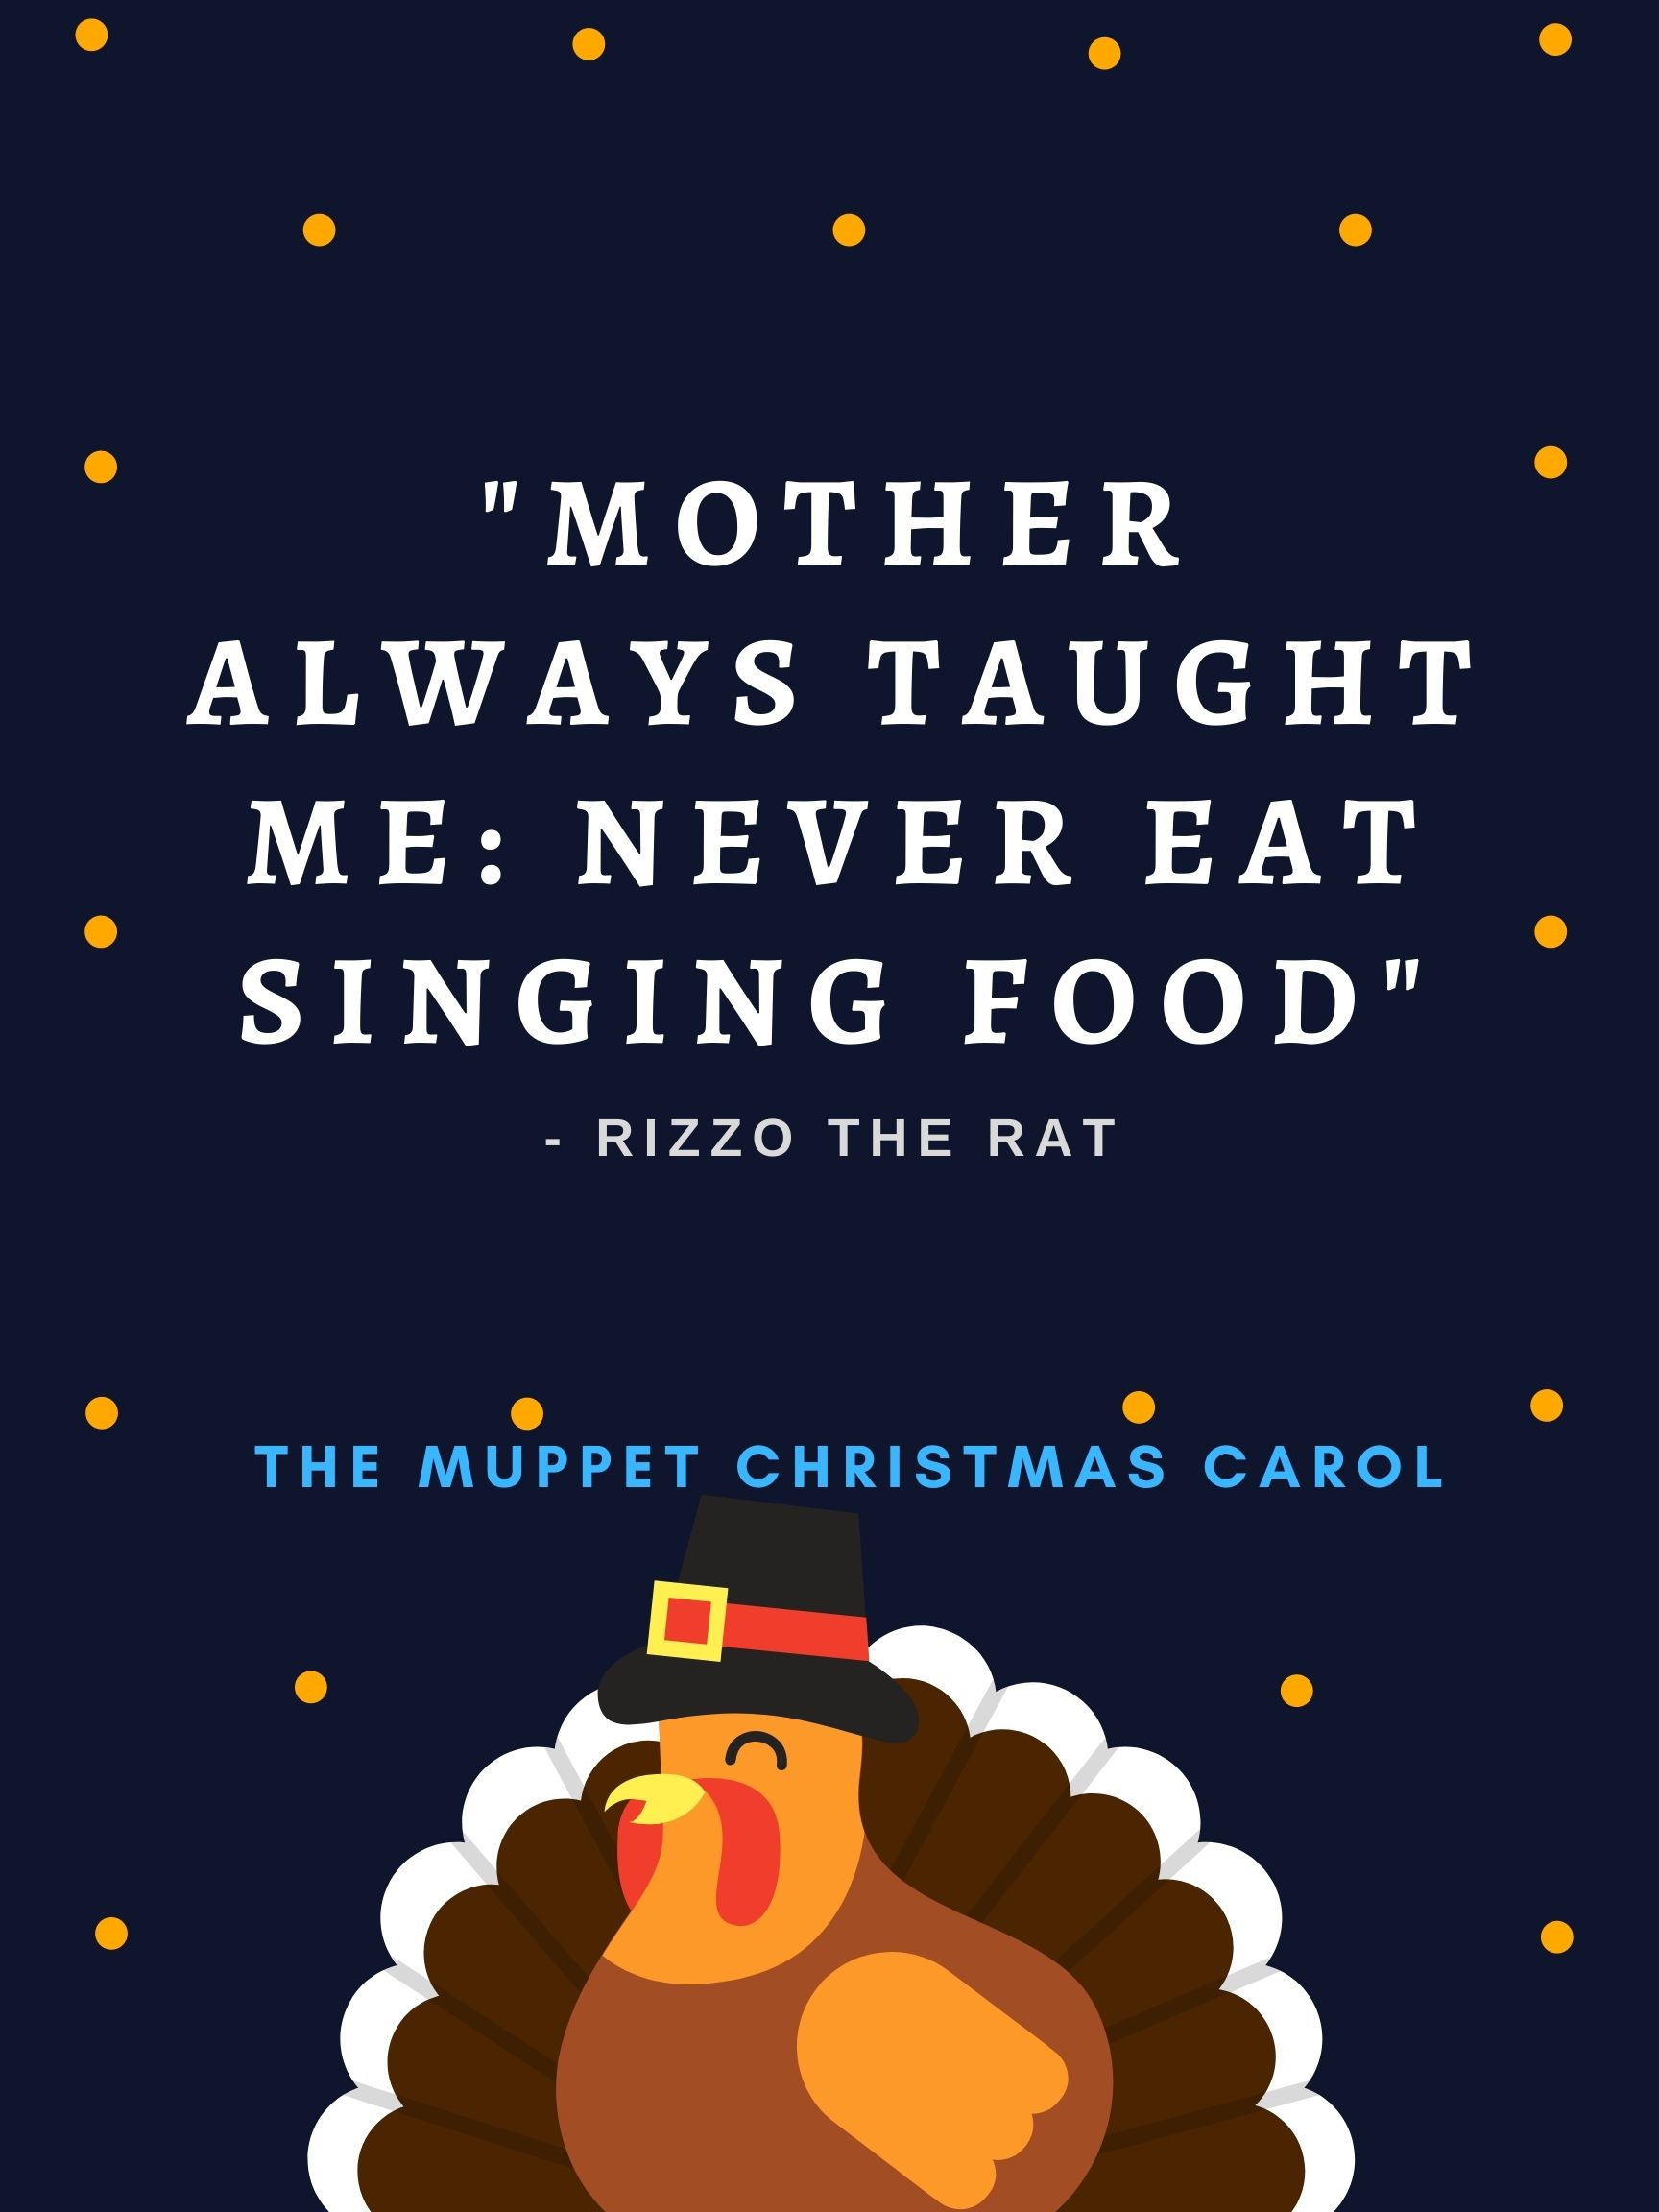 Funny Christmas Movie Quotes - Mother Always Taught Me Never Eat Singing Food Rizzo The Muppet Christmas Carol